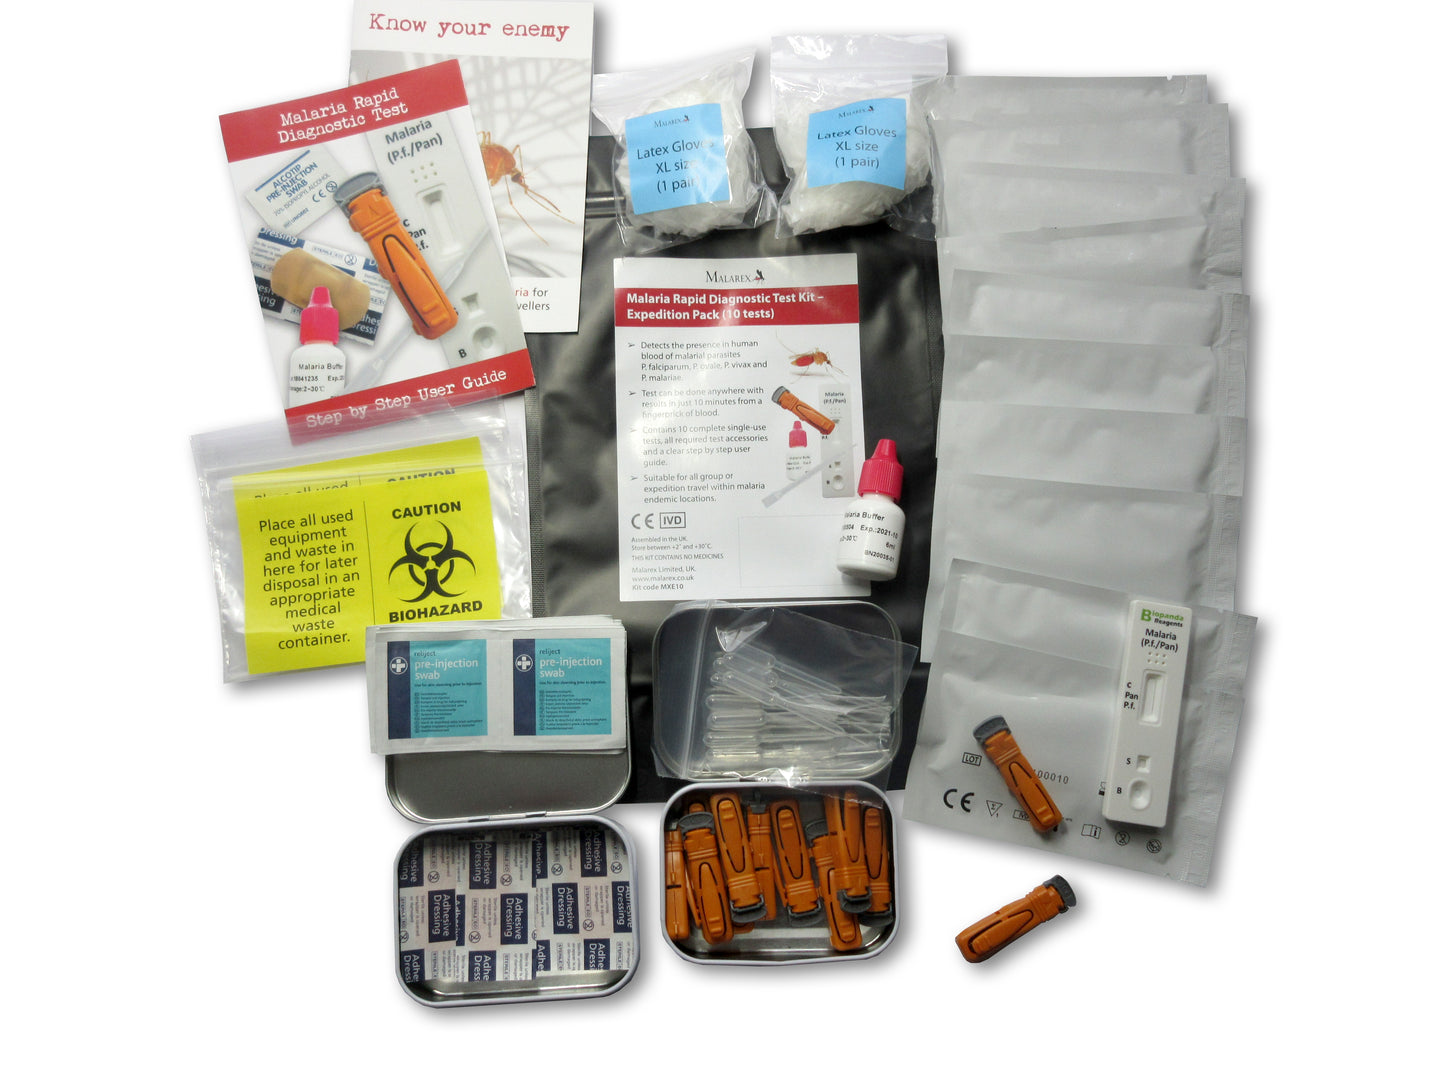 Malarex MXE10 Kit: EXPEDITION PACK. 10 complete malaria tests with all accessories (inc UK vat & delivery) - EXPIRY 31/01/2026